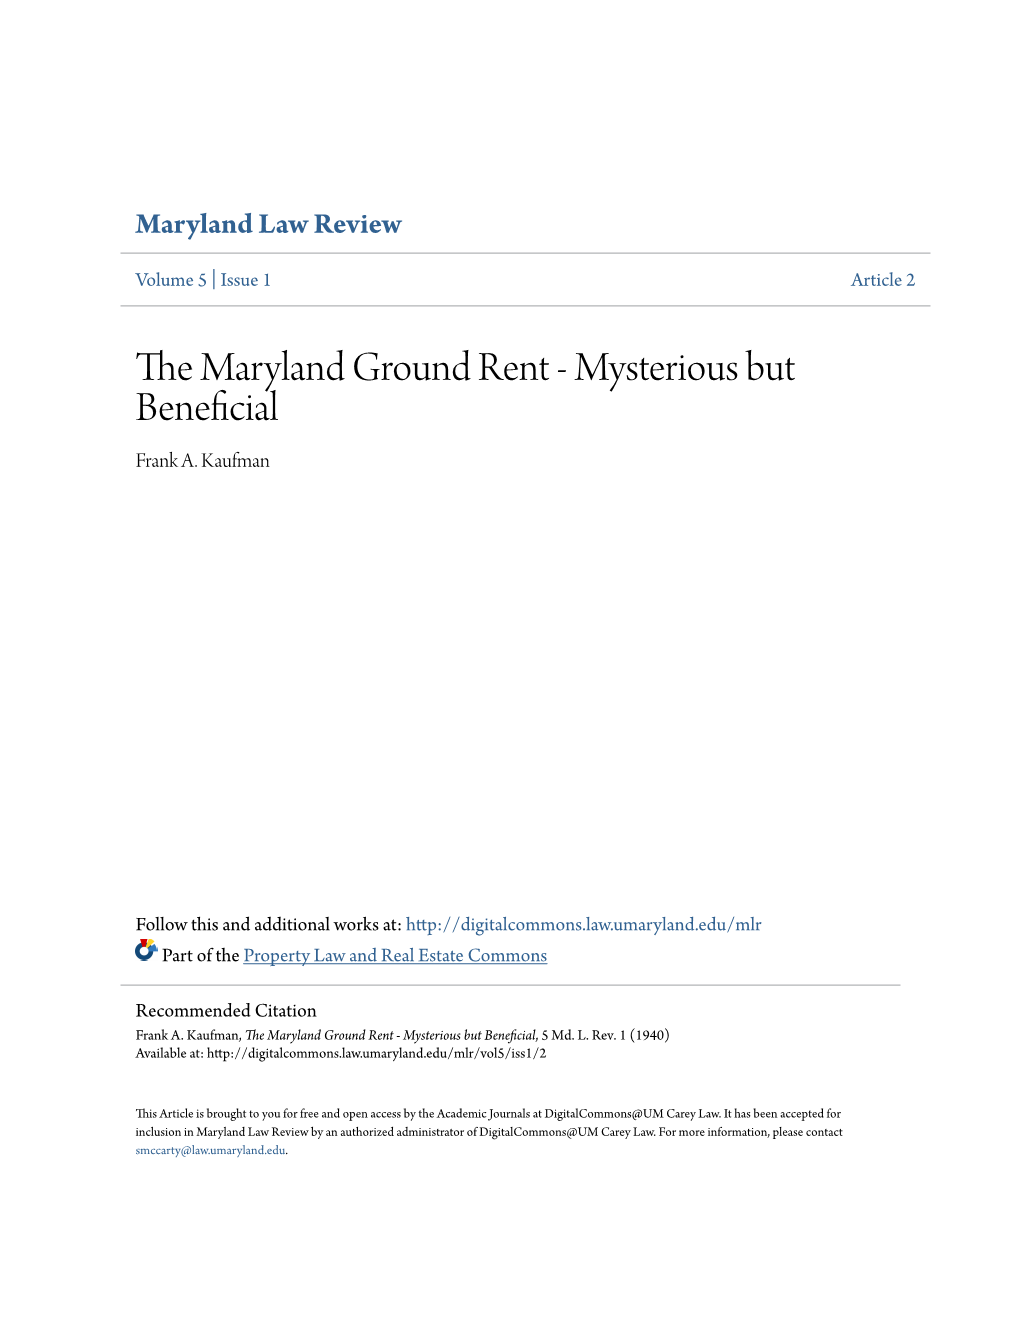 The Maryland Ground Rent - Mysterious but Beneficial, 5 Md